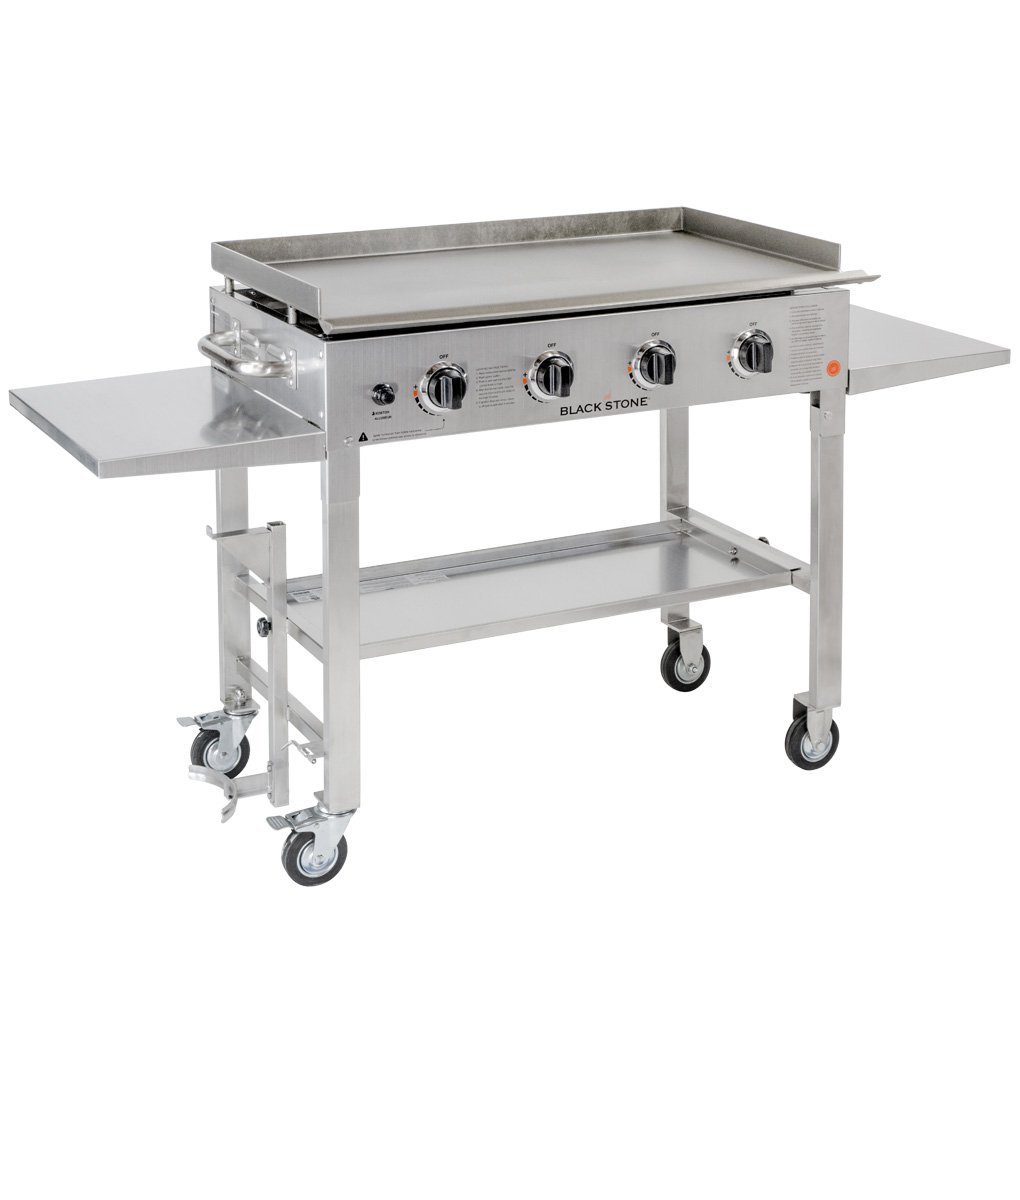 Barbecue Grill Gas And Charcoal - Buy Electric, Charcoal and Propane Grills At Best Prices